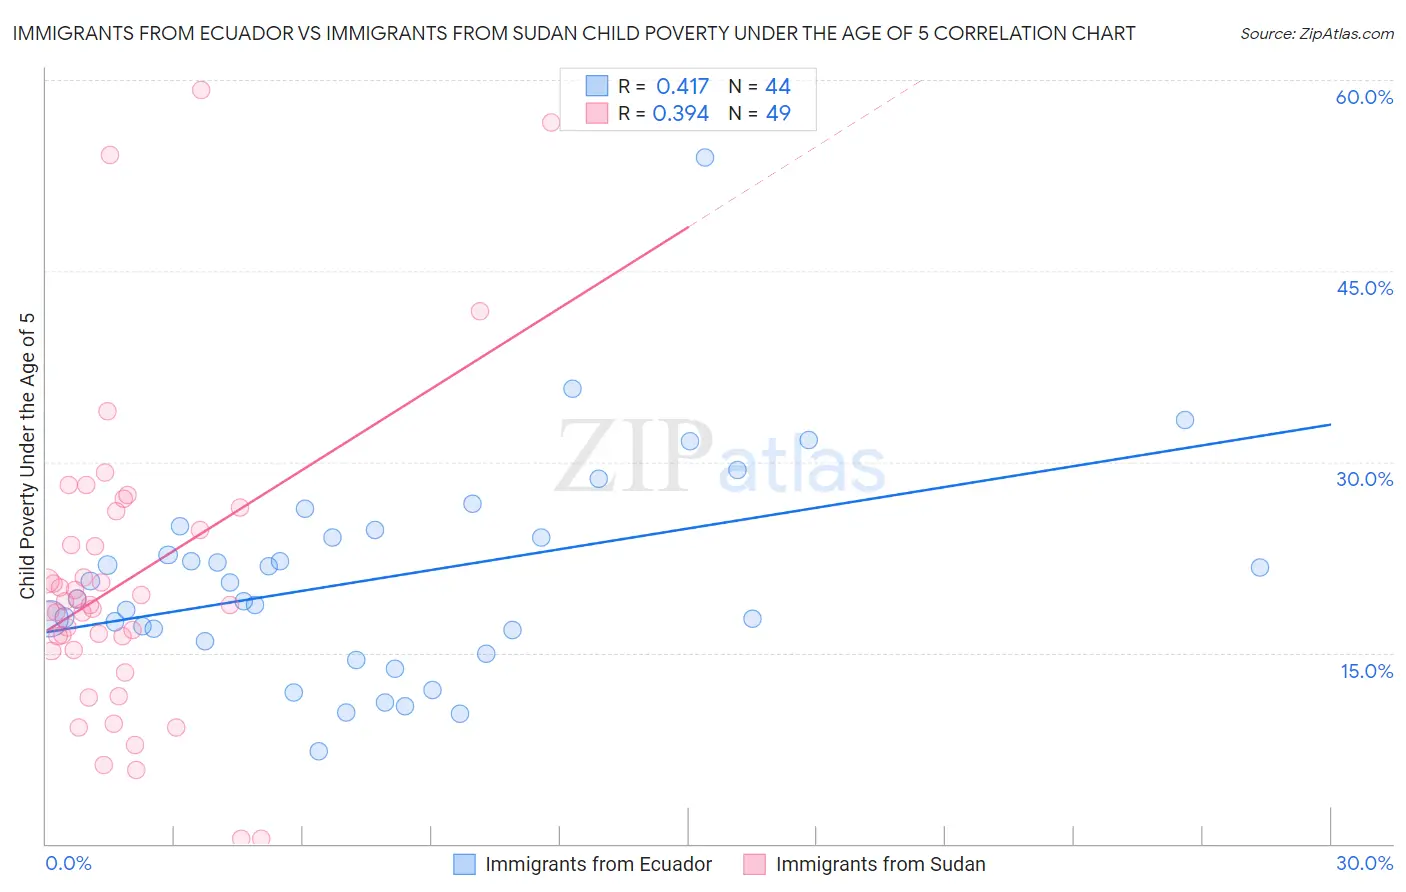 Immigrants from Ecuador vs Immigrants from Sudan Child Poverty Under the Age of 5